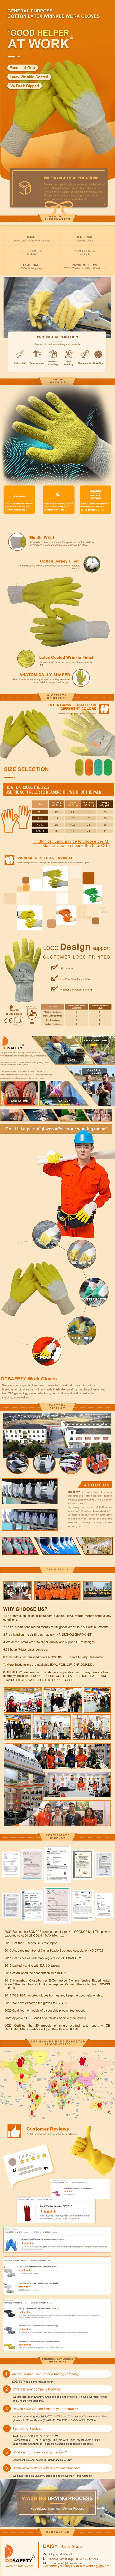 Yellow Cotton Latex Crinkle Coated Crinkle Finish Work Gloves - DCL403 Yellow Cotton Latex Crinkle Coated Crinkle Finish Work Gloves - DCL403 gloves,latex coated gloves,work gloves,cotton work gloves,latex crinkle gloves